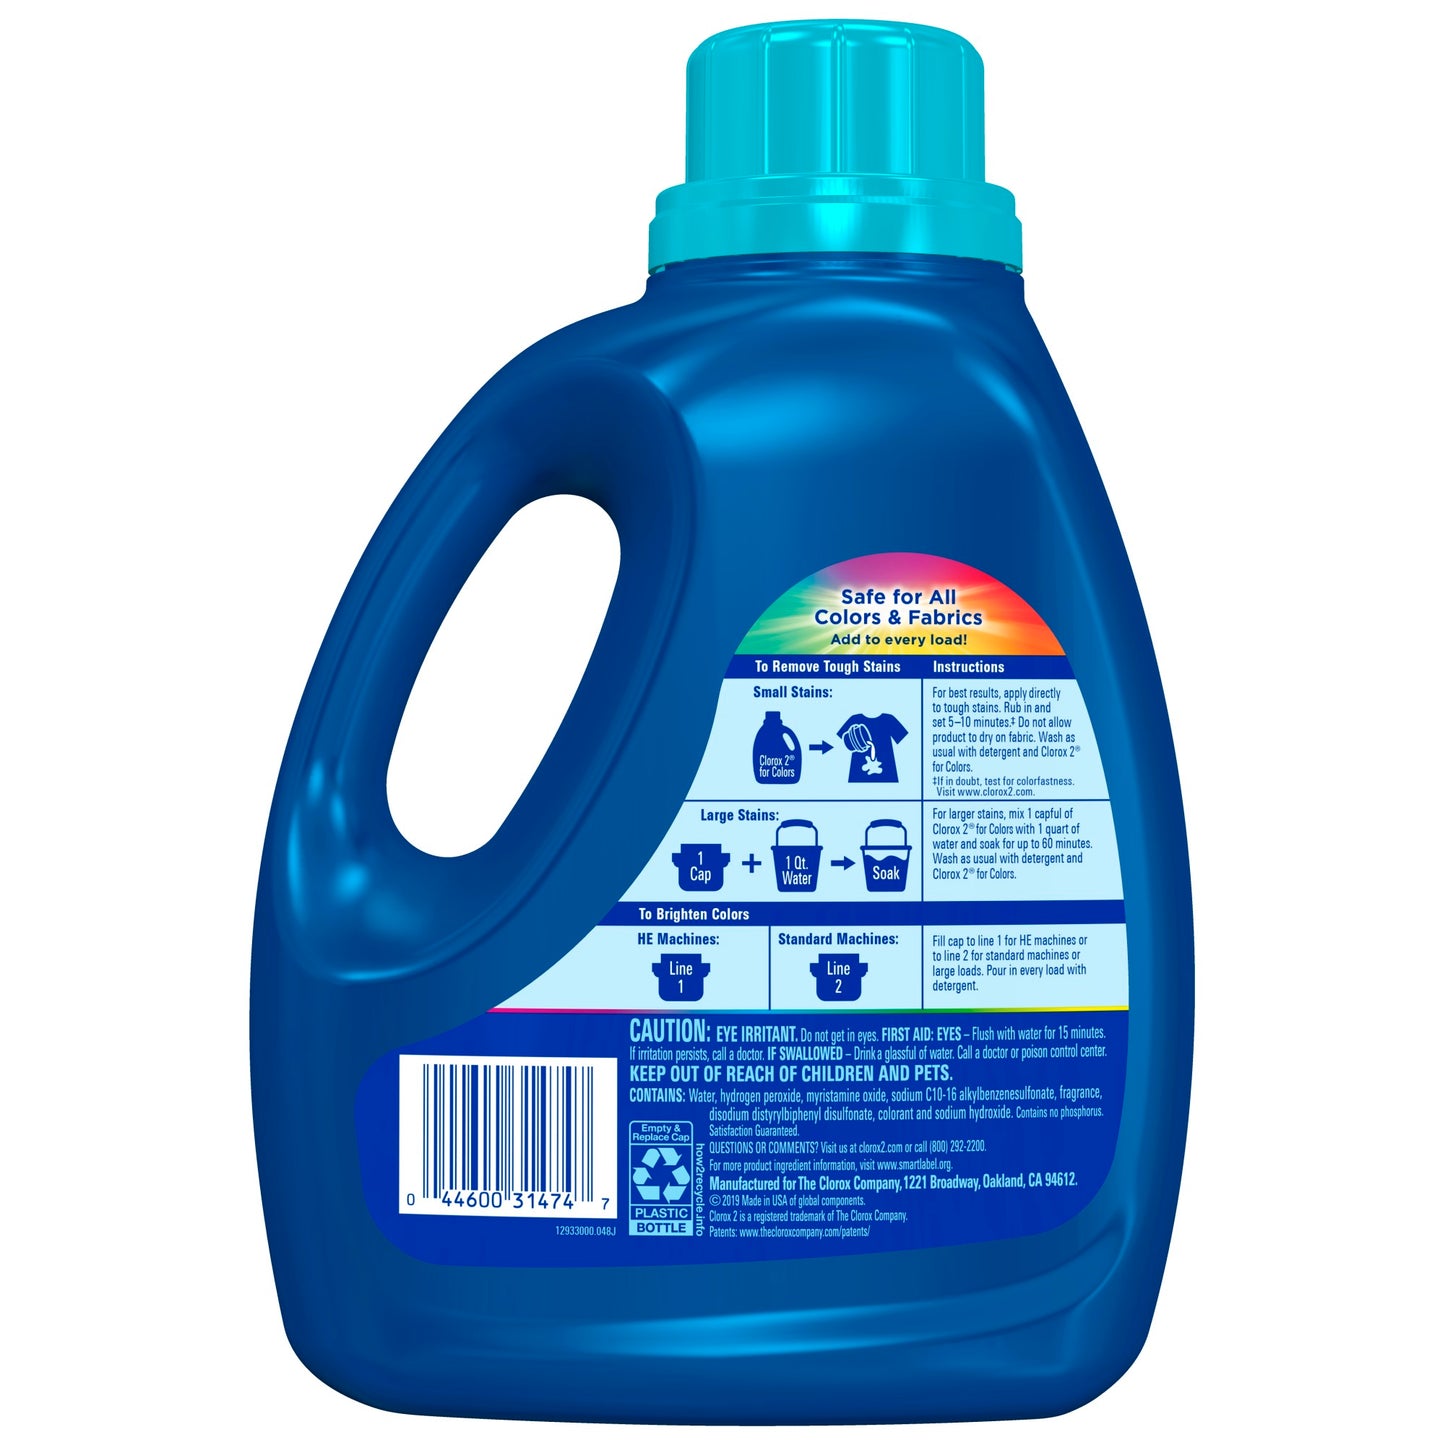 Clorox 2 for Colors - Stain Remover and Color Brightener Clean Linen, 88 Ounces